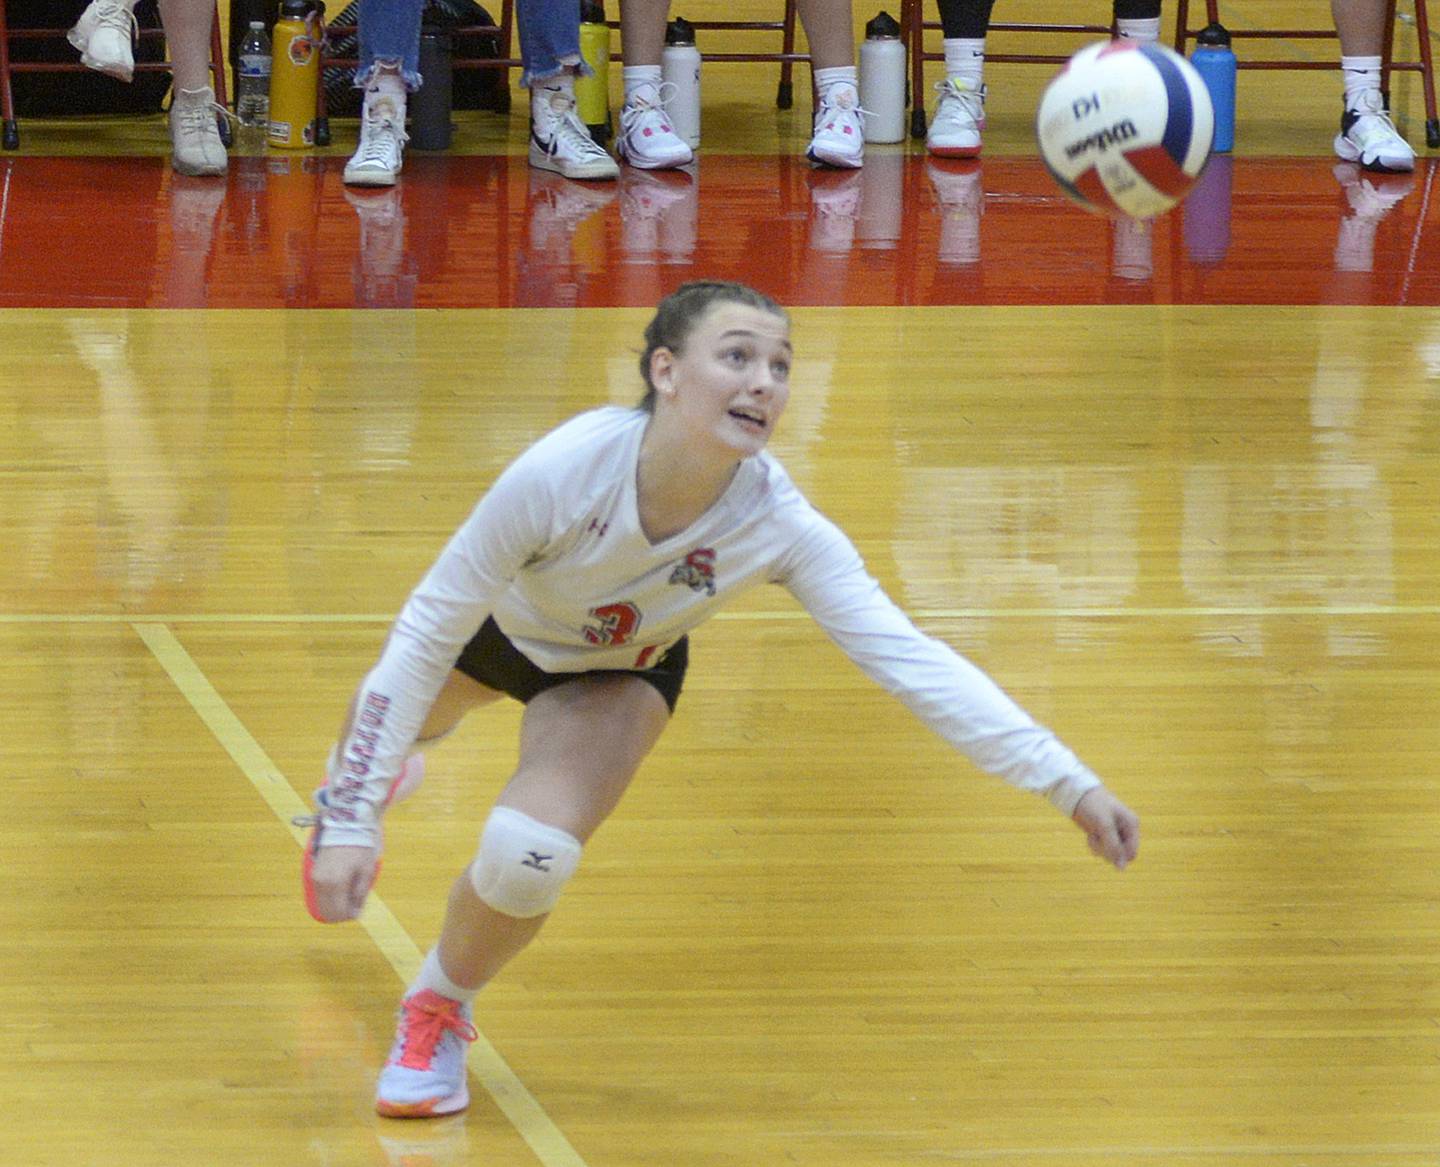 Streator’s Emma Rambo reaches to catch up to a spike against Lisle in the second set Tuesday at Streator.